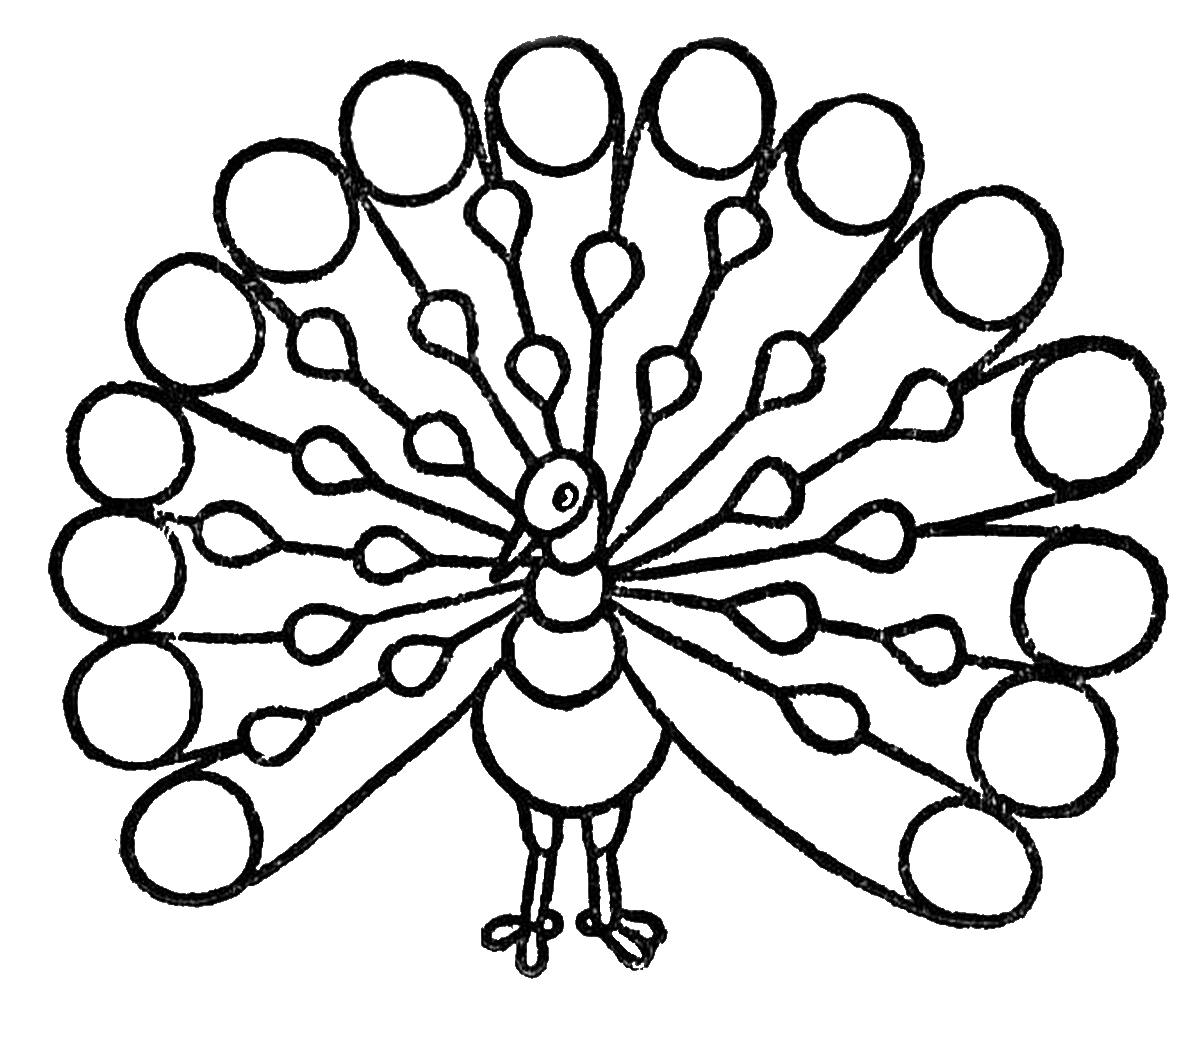 picture of peacock for colouring peacock coloring pages for of picture peacock colouring 